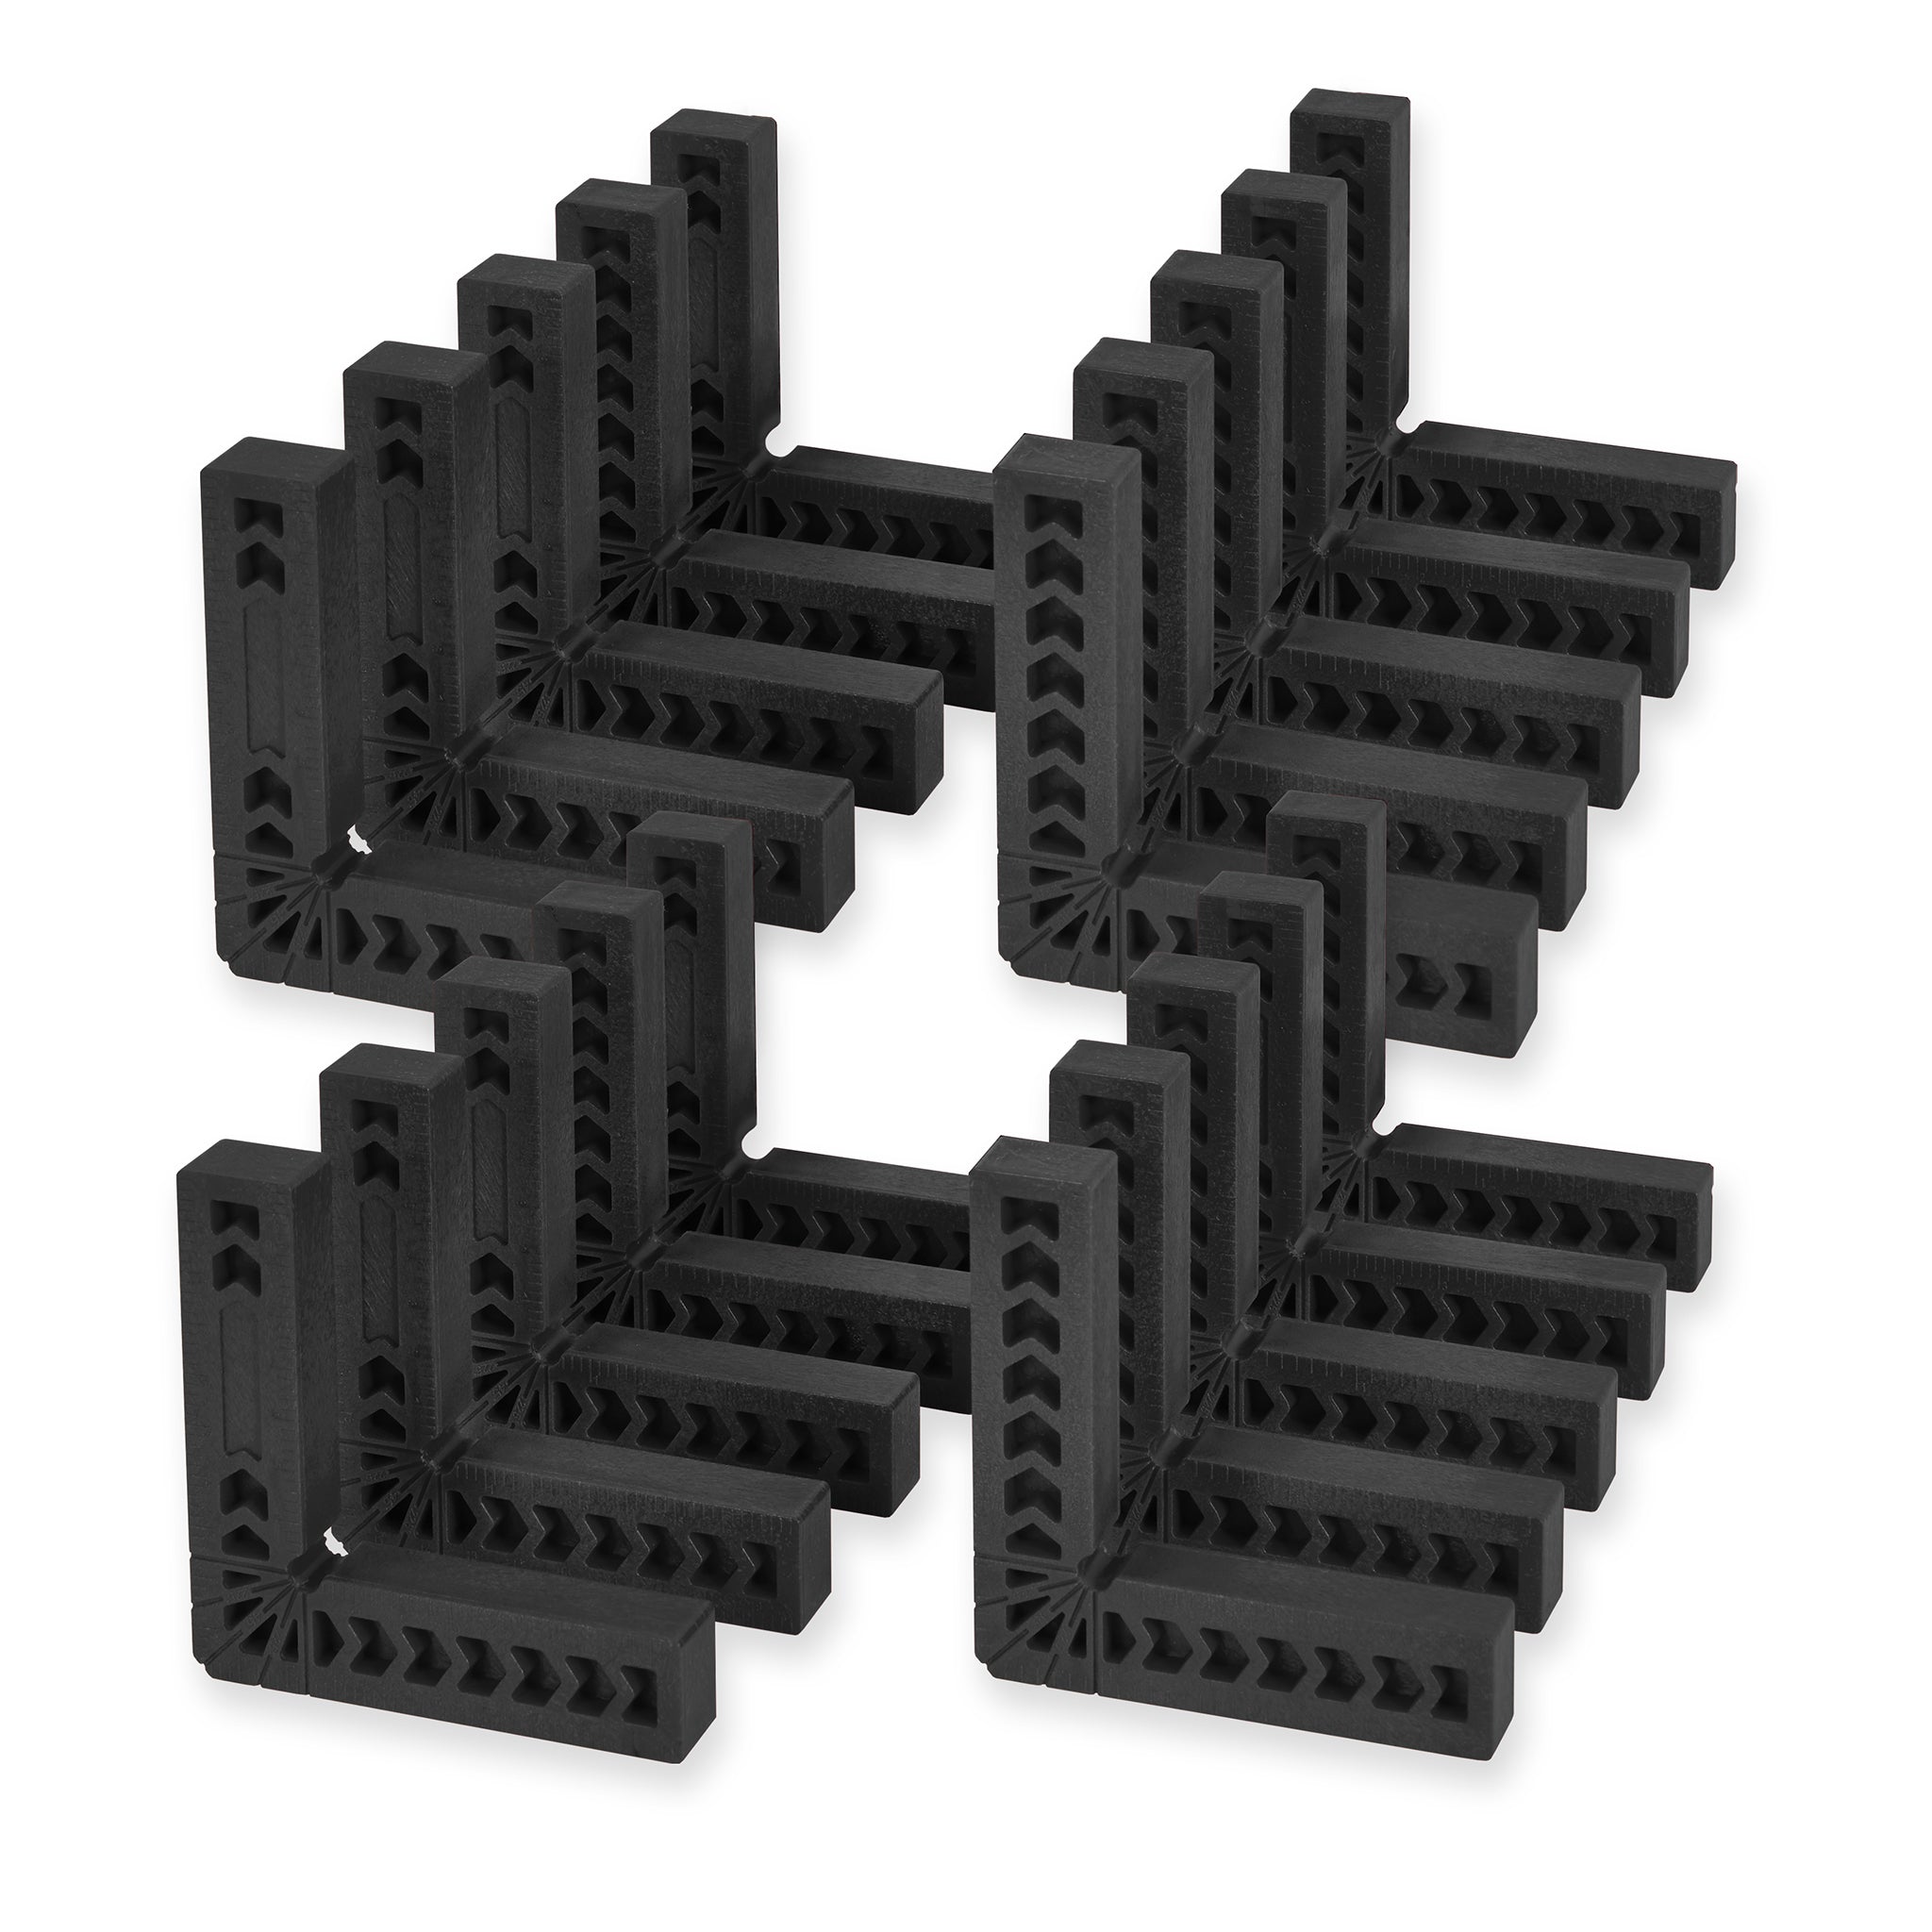 Clamping Squares - Pack of 40 